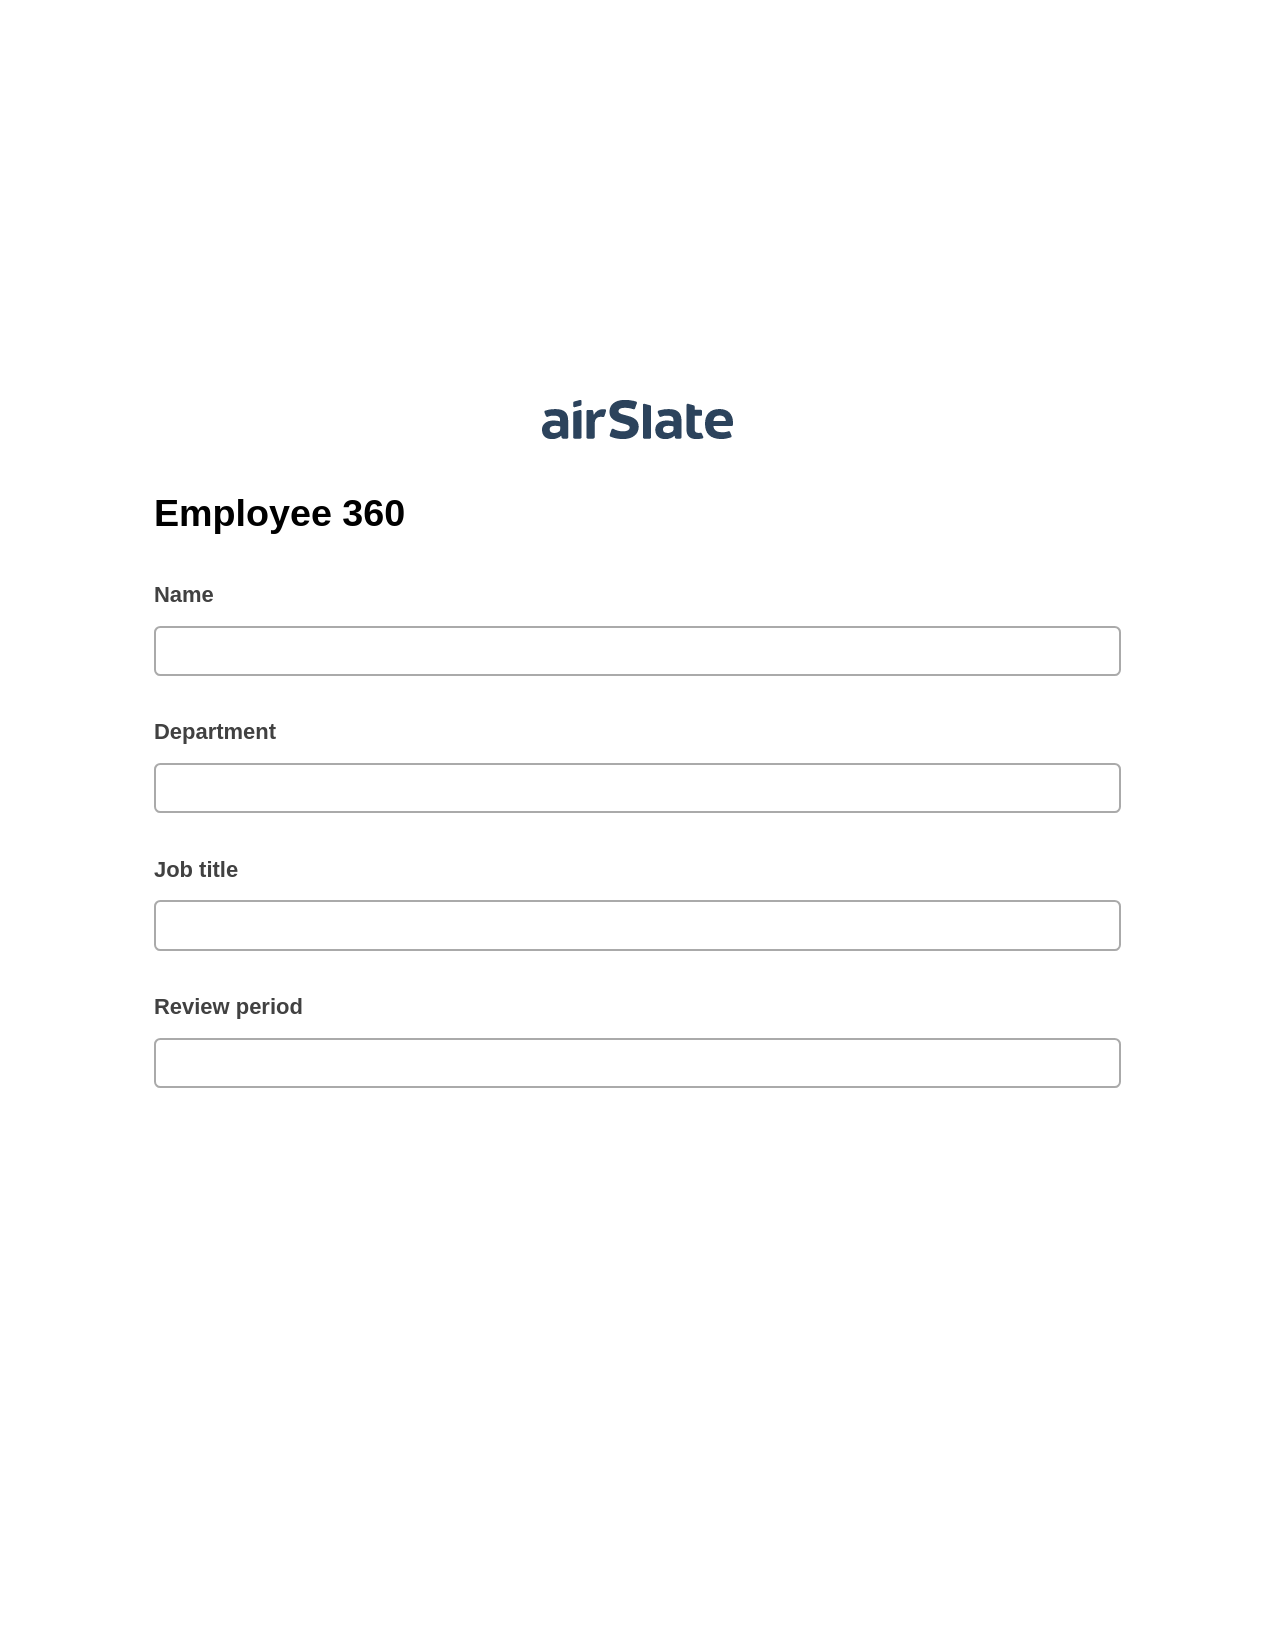 Employee 360 Pre-fill Dropdowns from CSV file Bot, Update MS Dynamics 365 Record Bot, Export to Google Sheet Bot